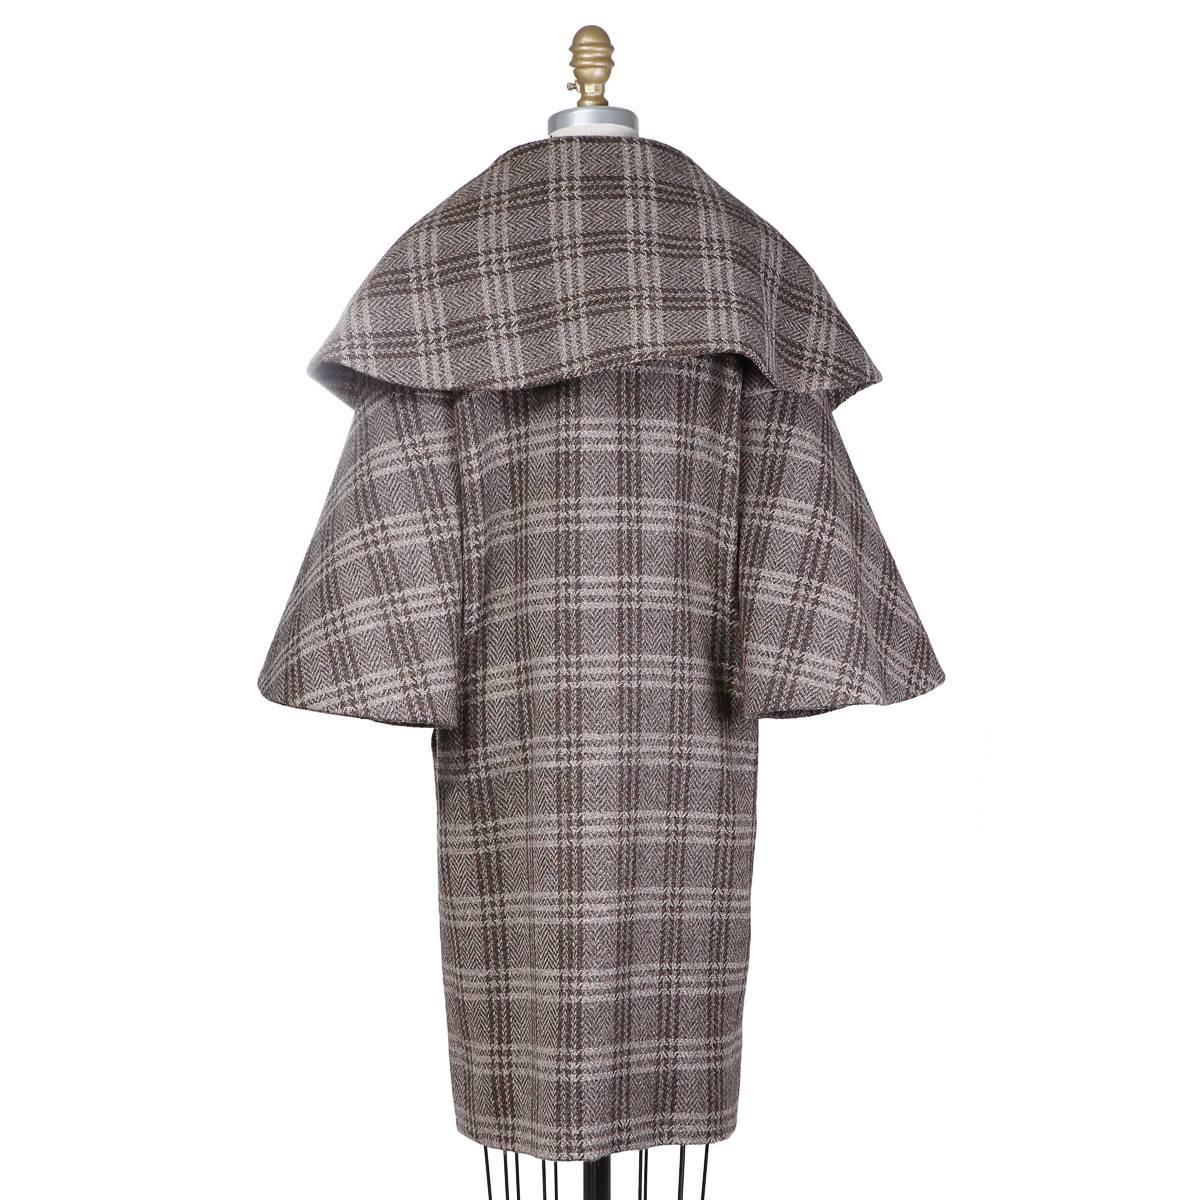 This is a wool coat by Pierre Cardin c. 1960s.  It features a plaid pattern and an oversized collar and flared 3/4 sleeves.  
Shoulder to shoulder is 14.5"
Sleeve length is 19.5"